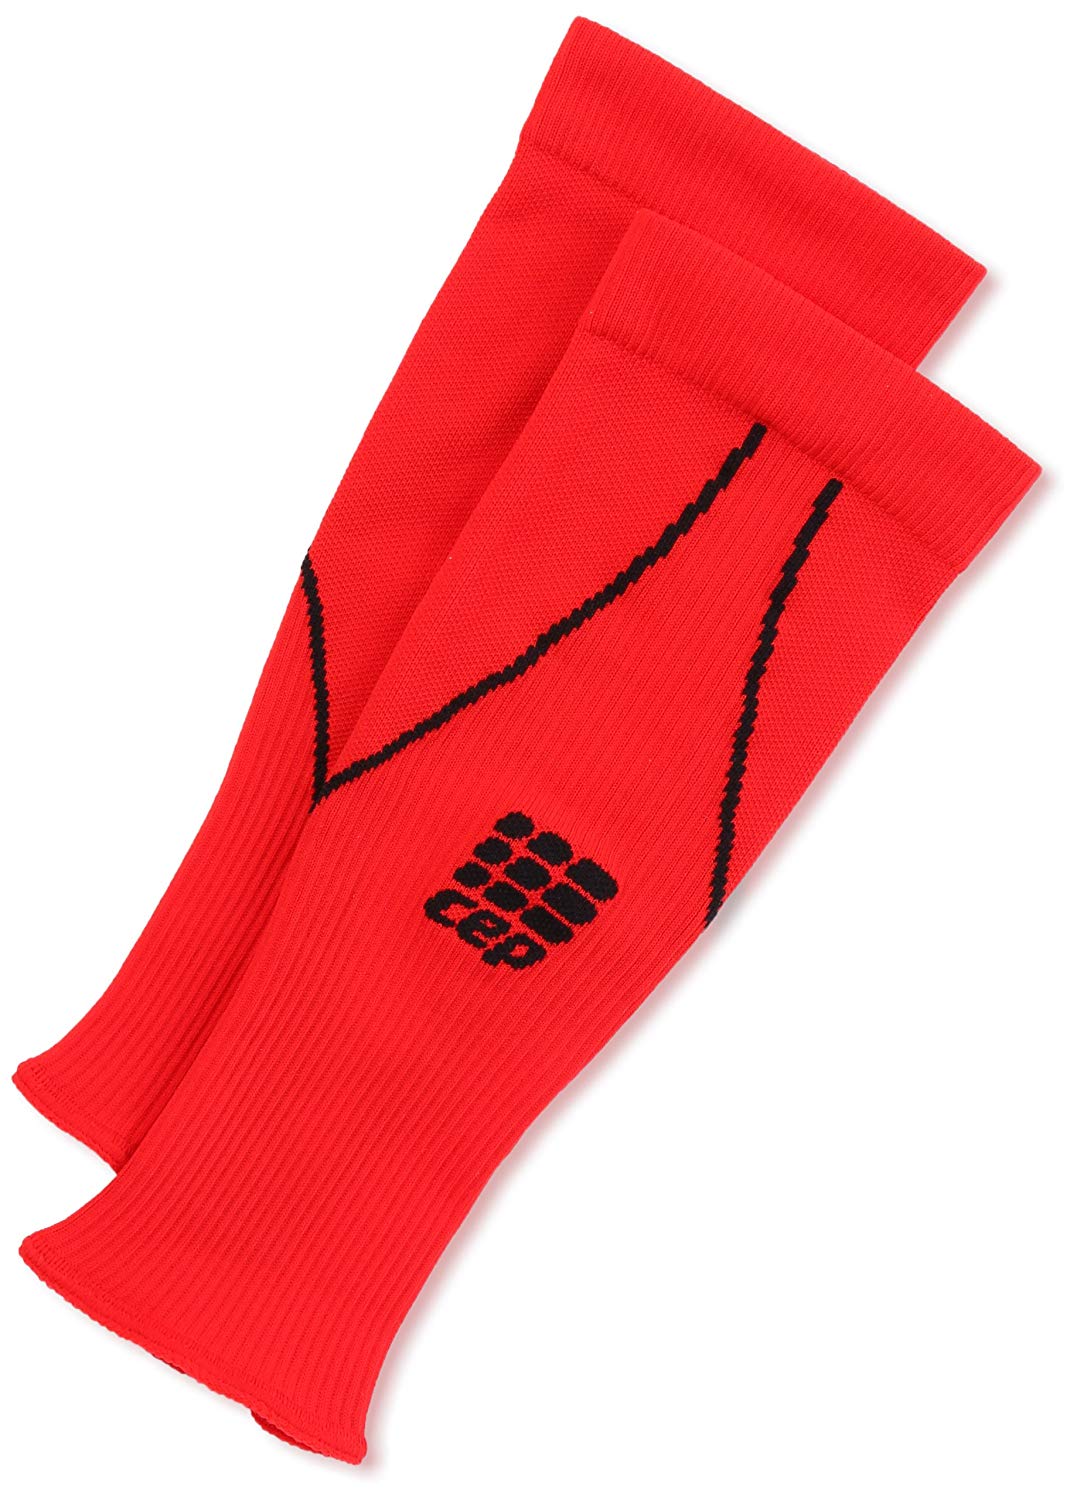 CEP Pro+ Calf Sleeves Womens Red